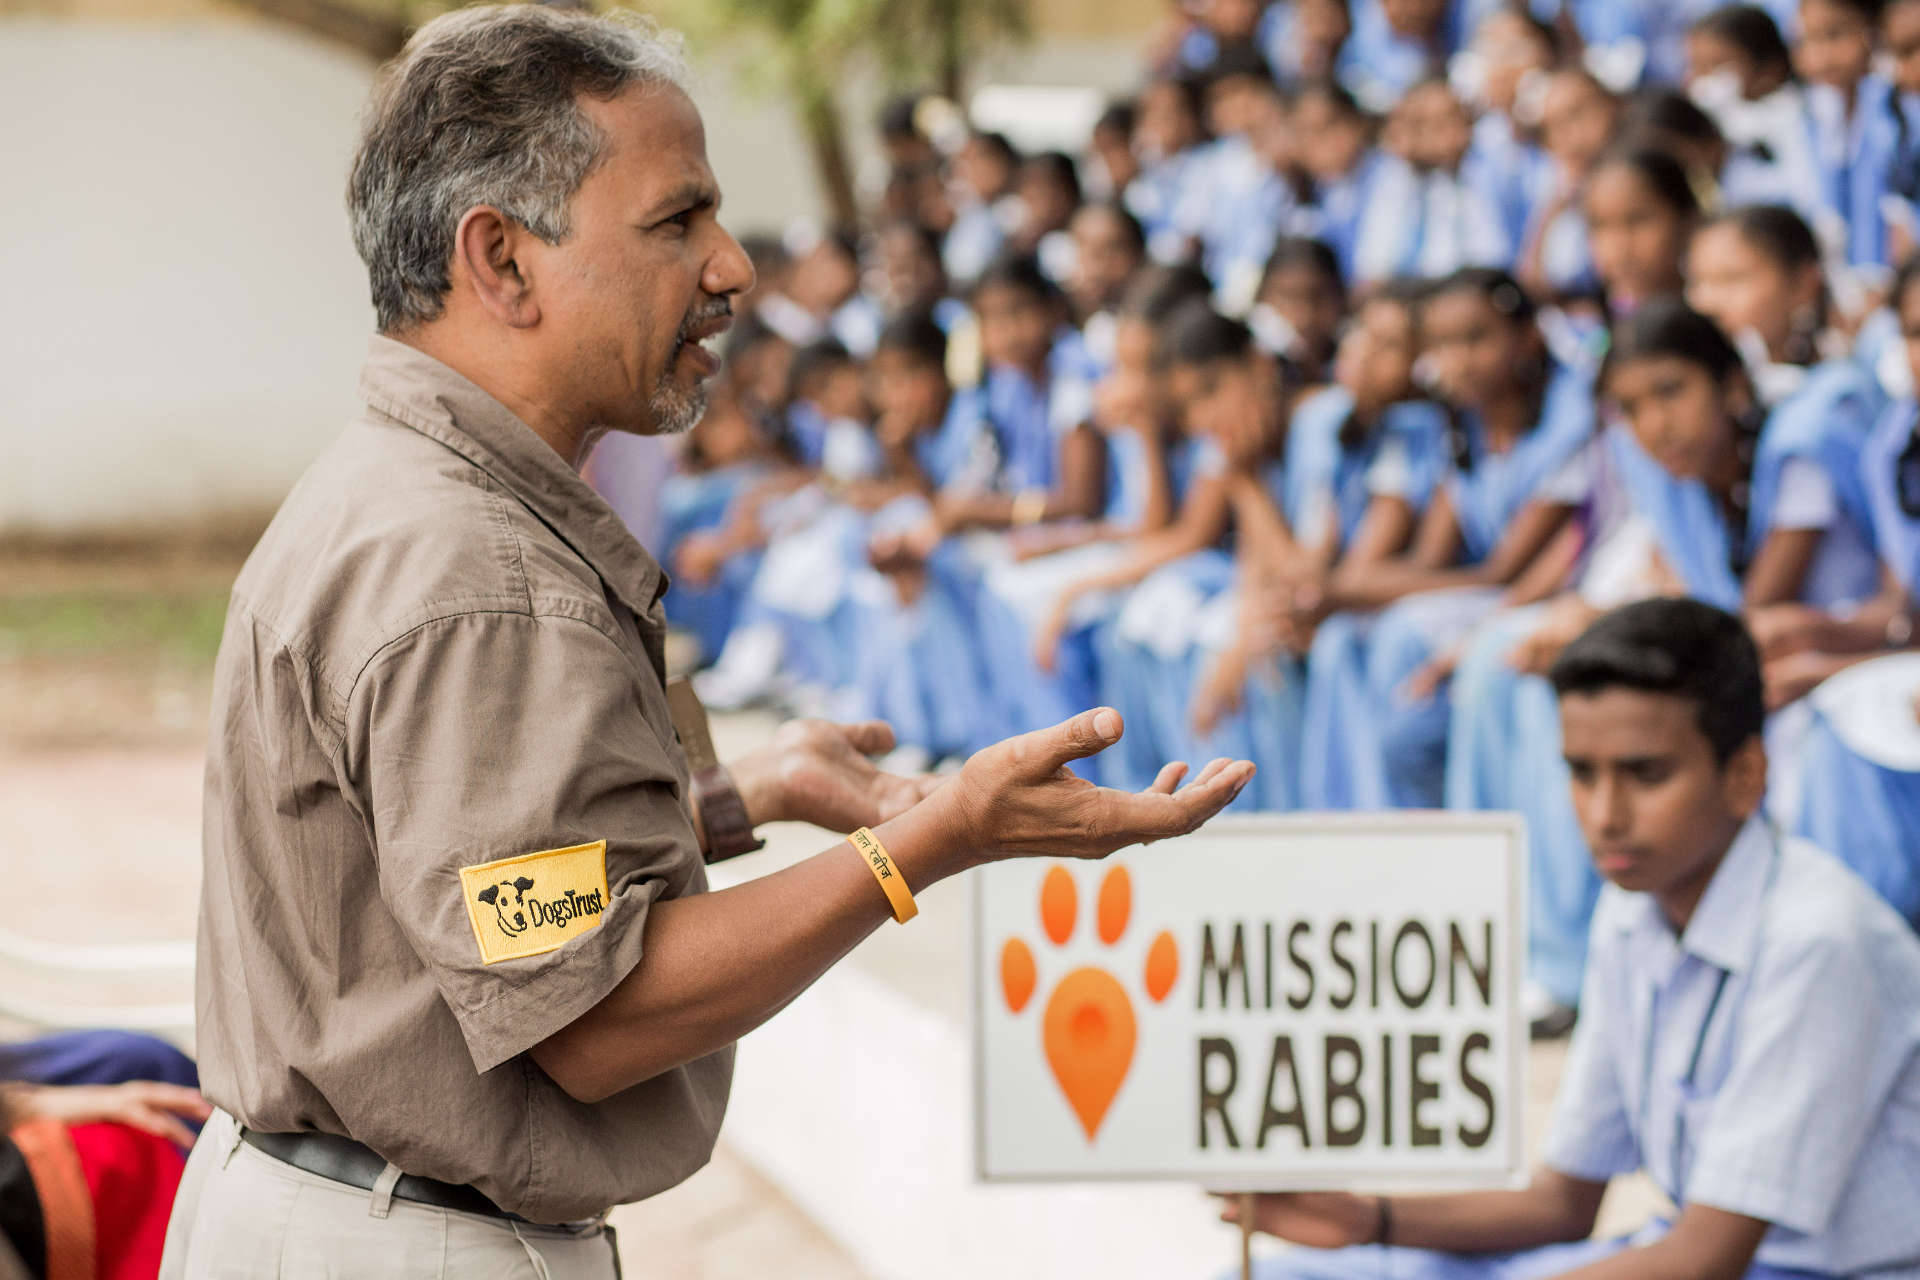 Mission Rabies delivers life-saving lessons to 5 million children